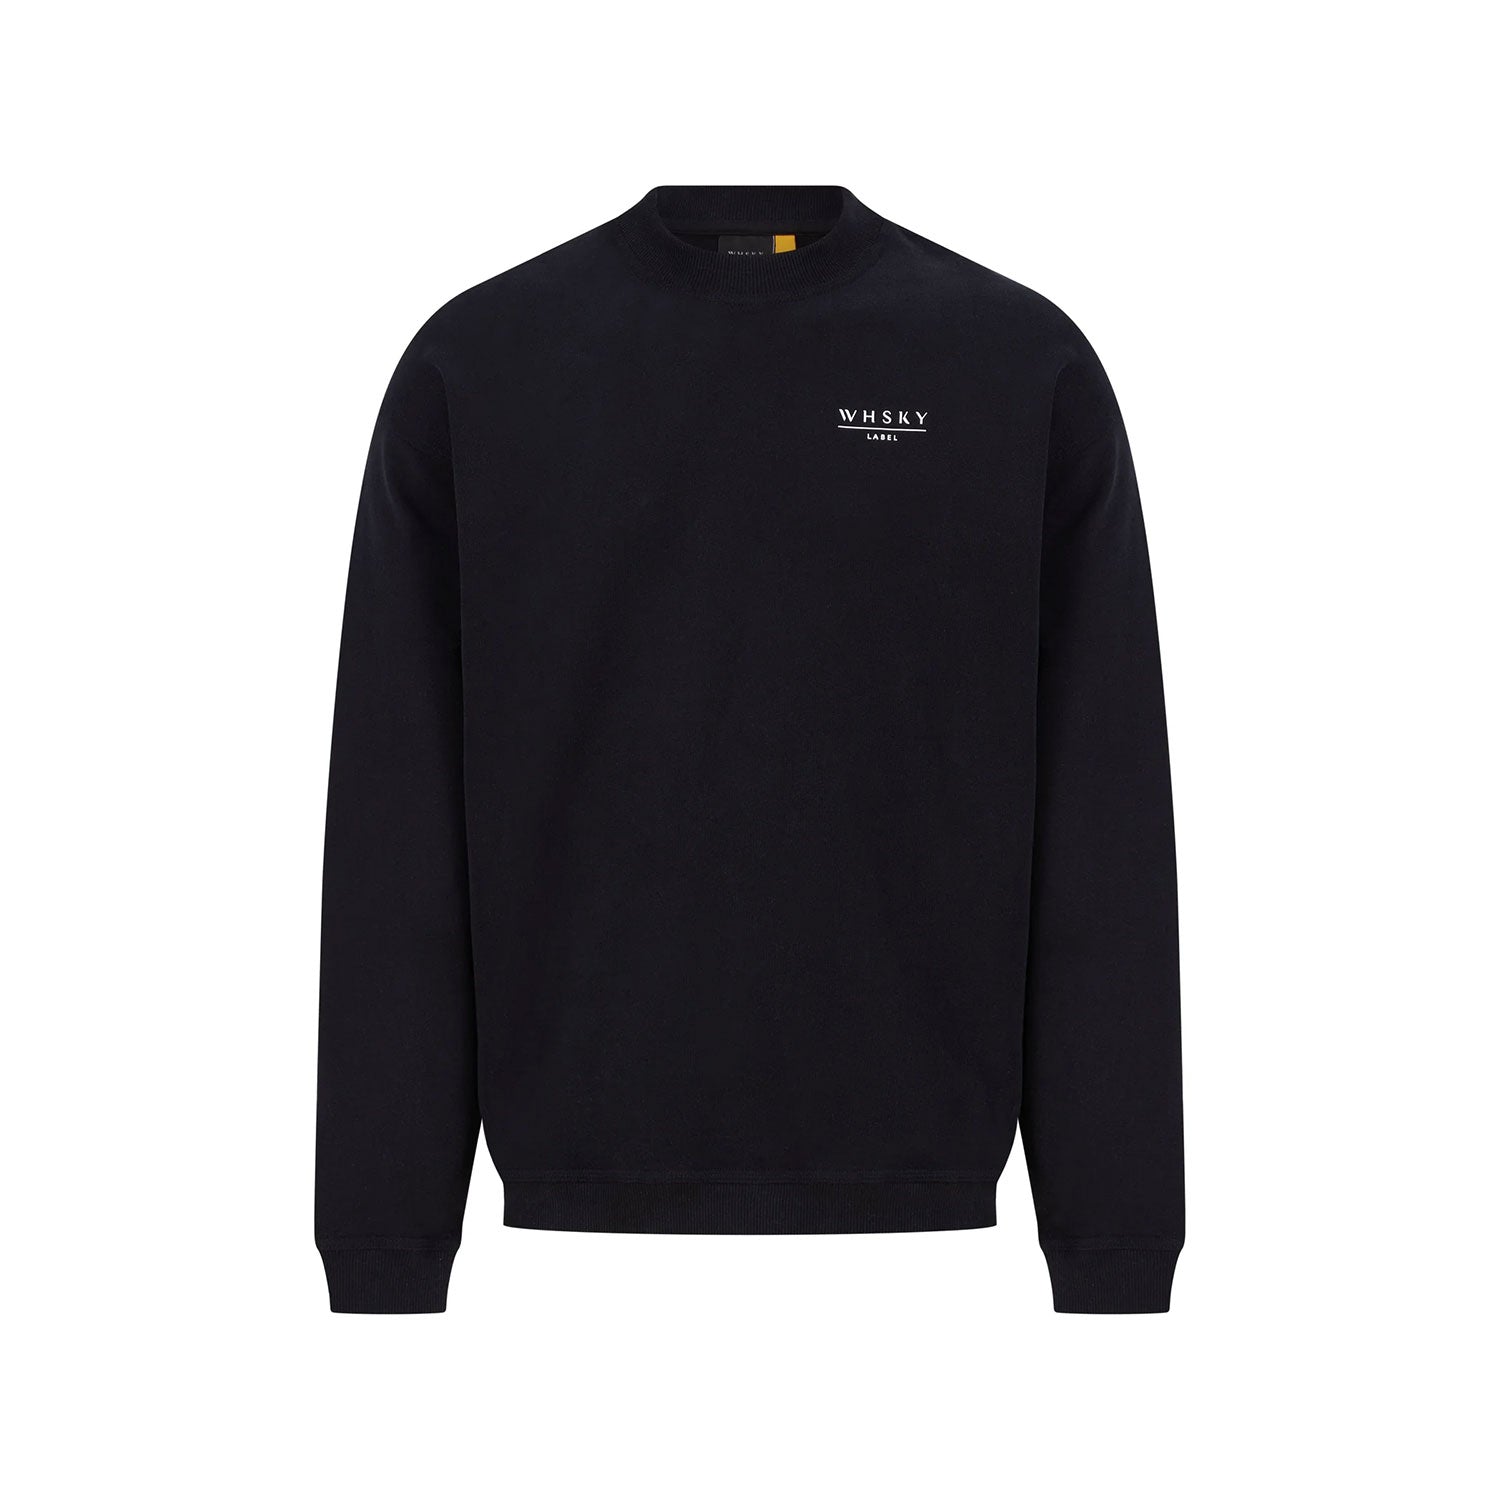 Black 'Exclusive for Vitkac' limited collection sweatshirt